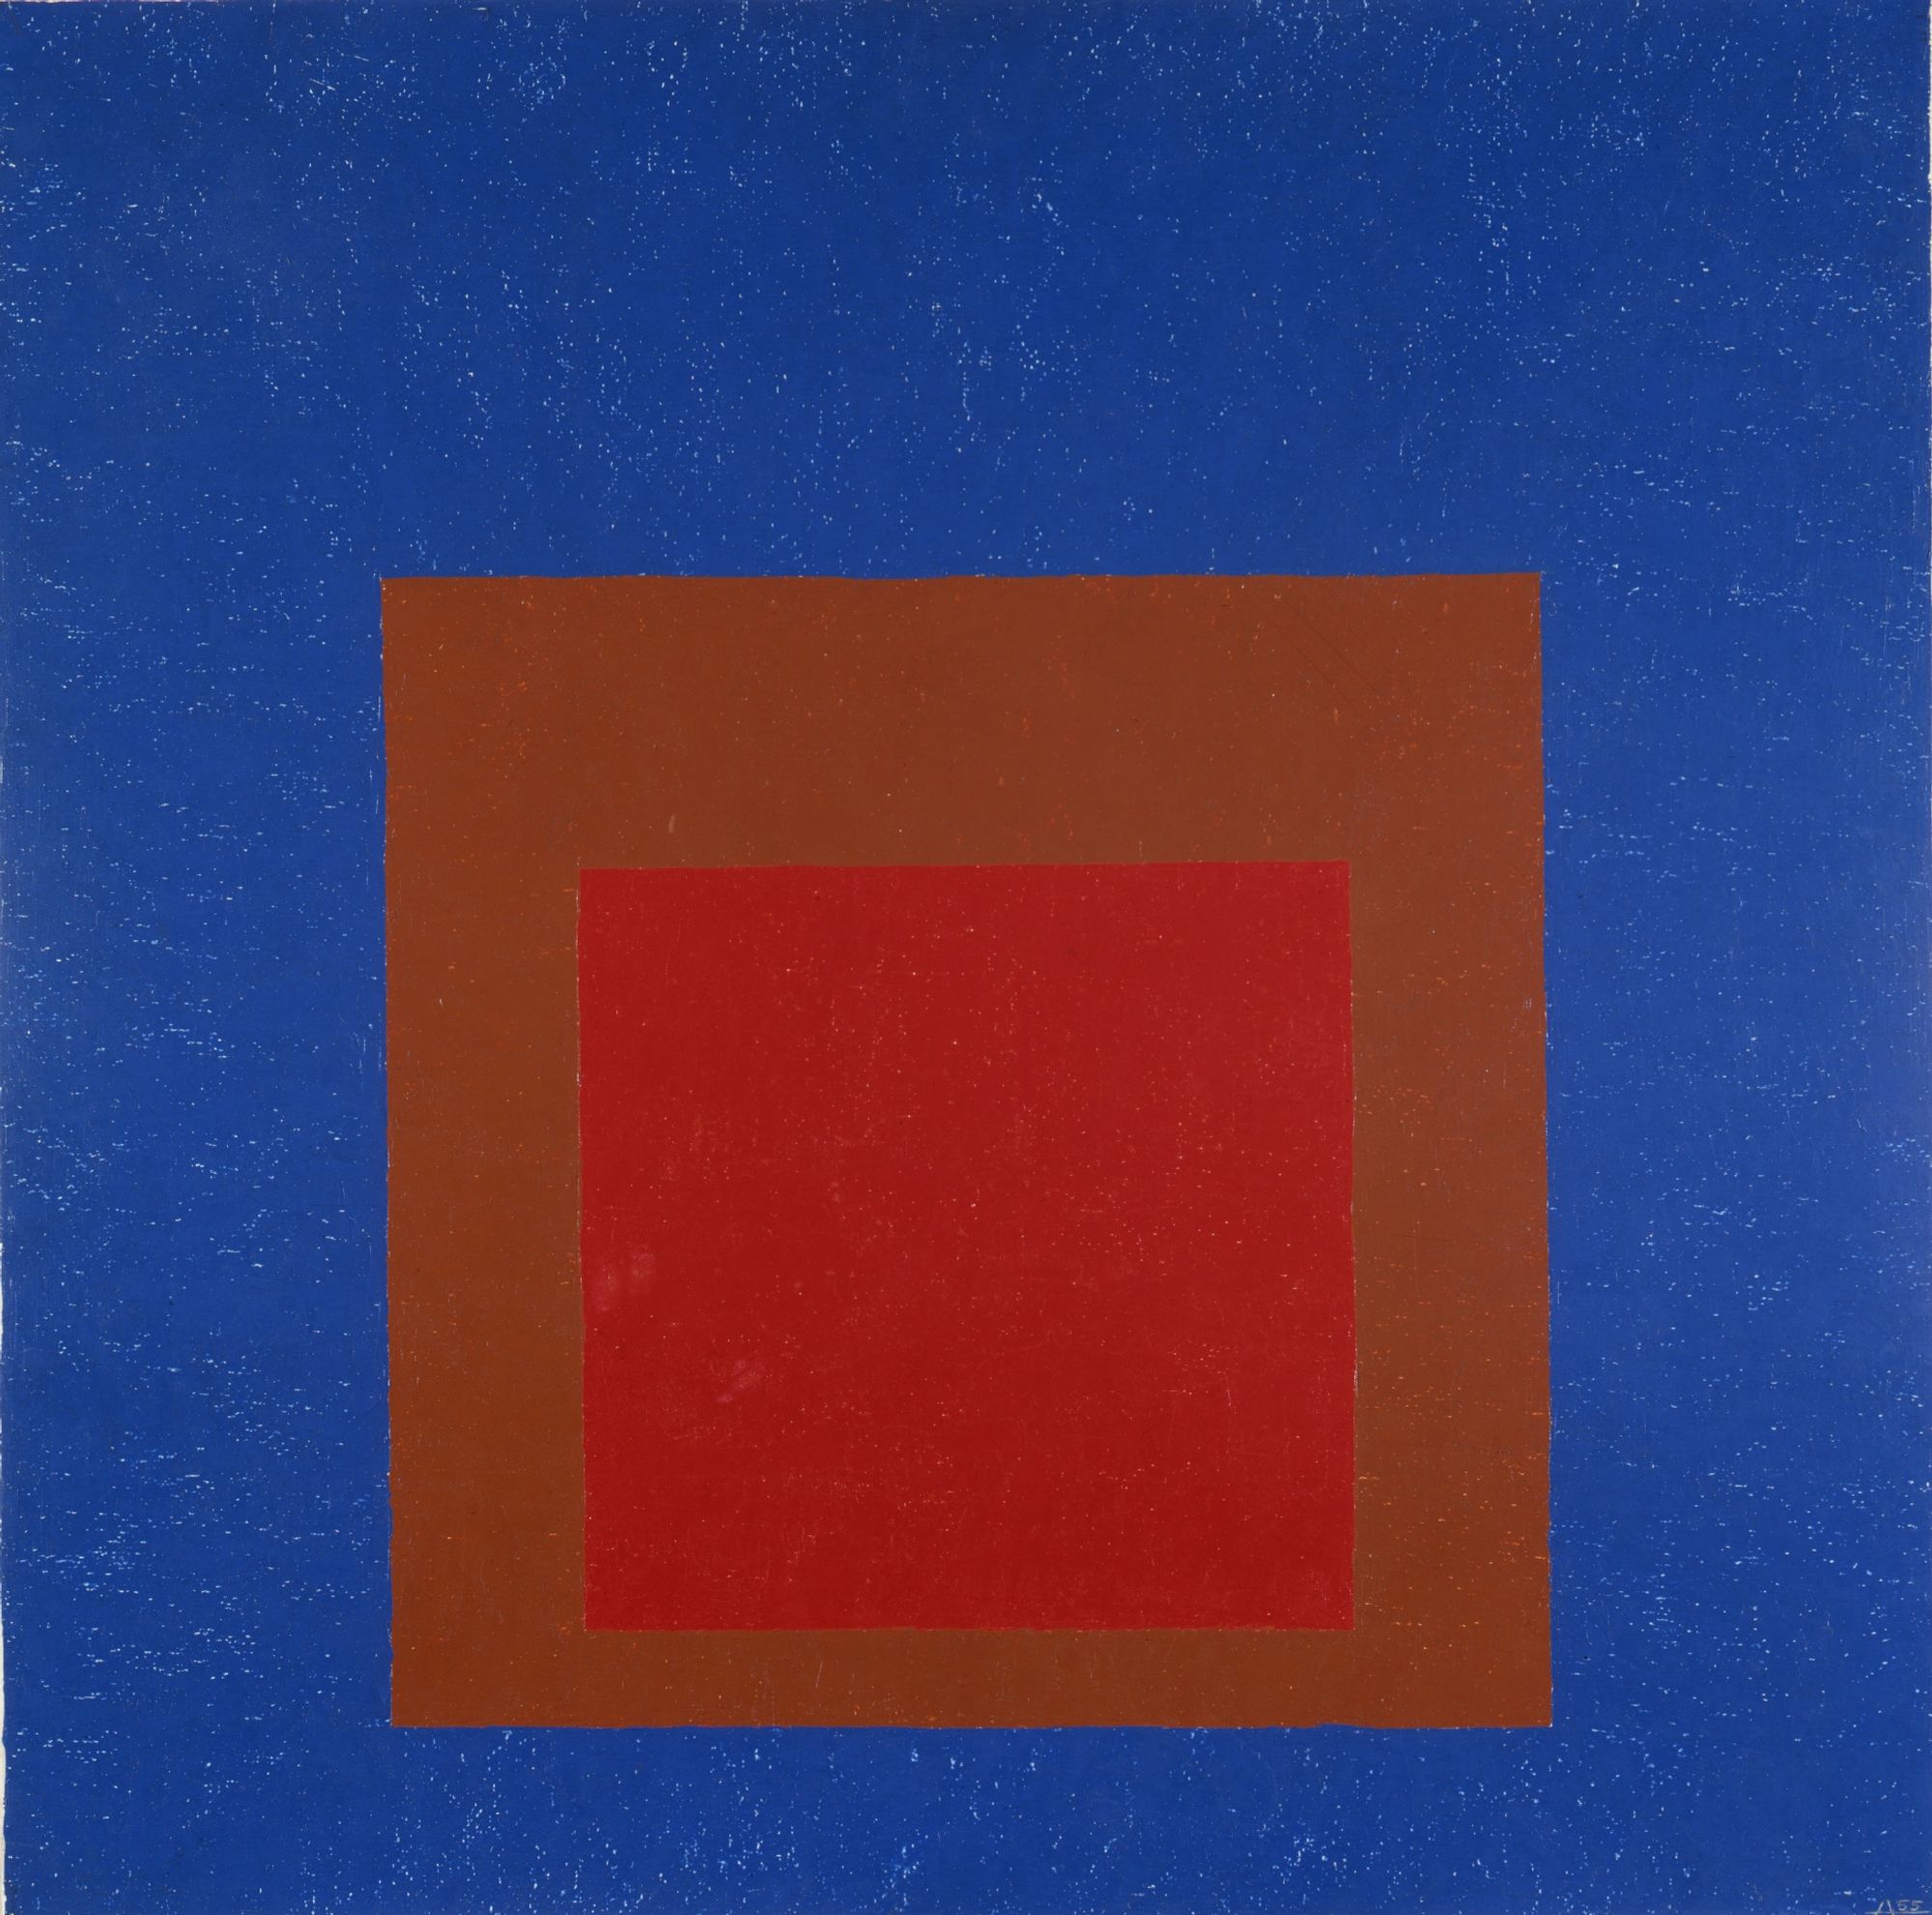 A bright, red square is nested within concentric, solid squares turning from red to deep blue.